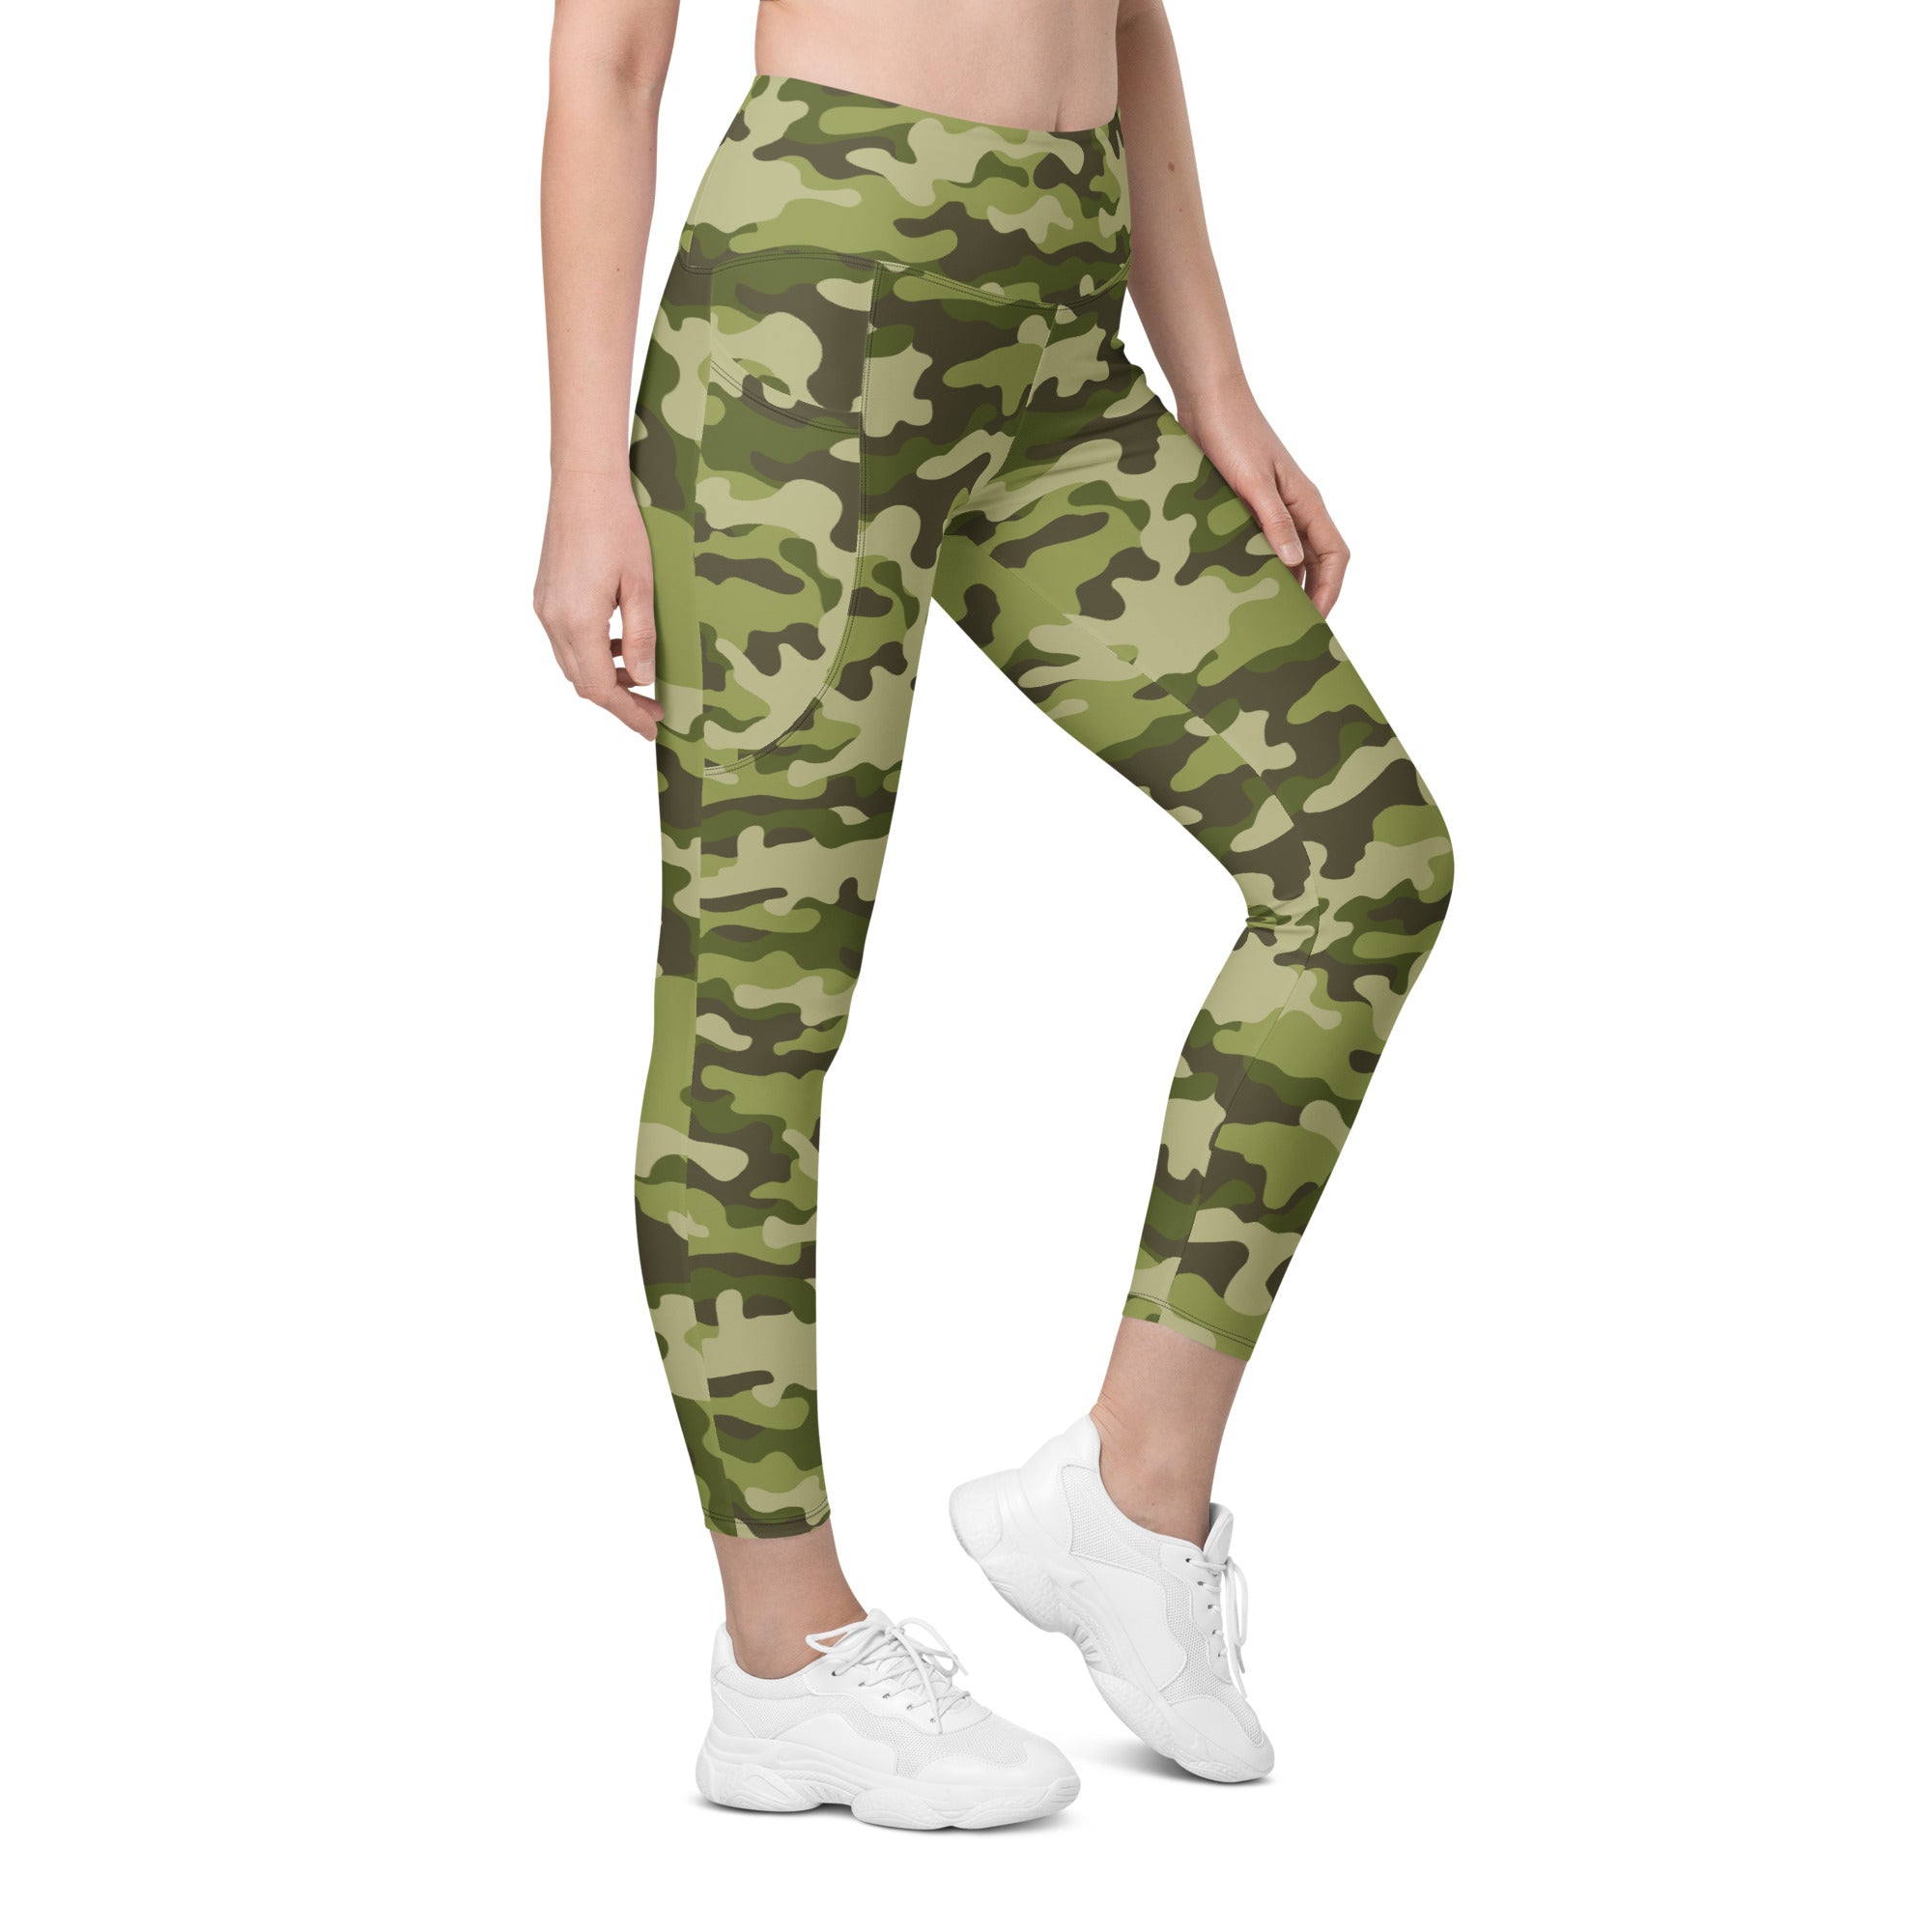 Classic Camo Leggings With Pockets